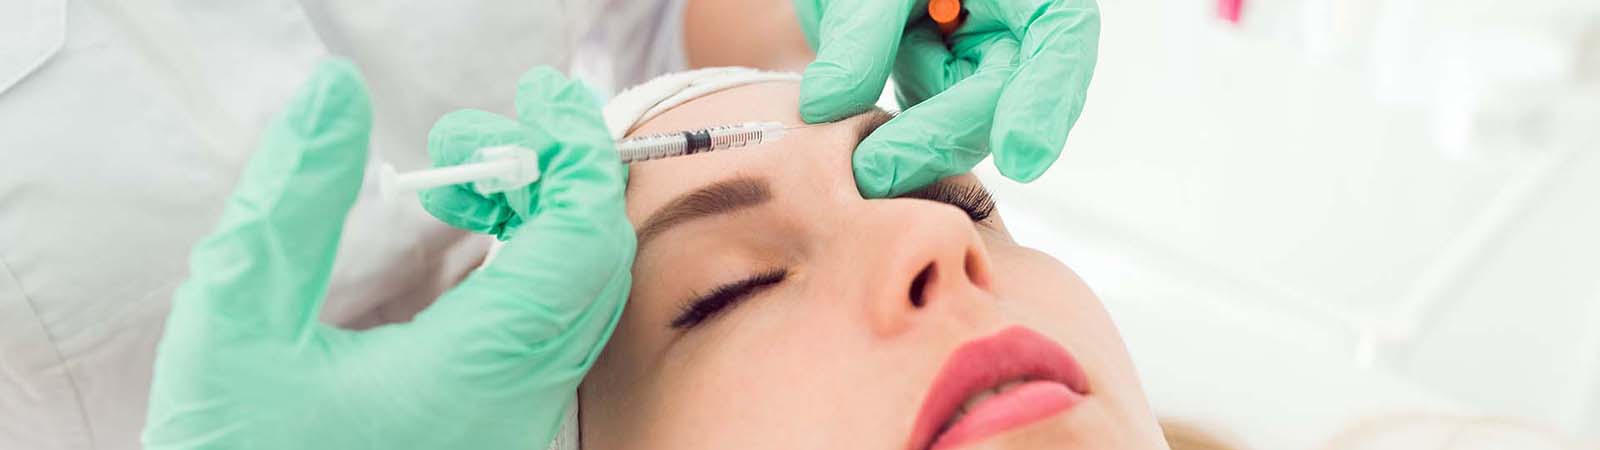 What Are The Benefits Of Botox Injections?